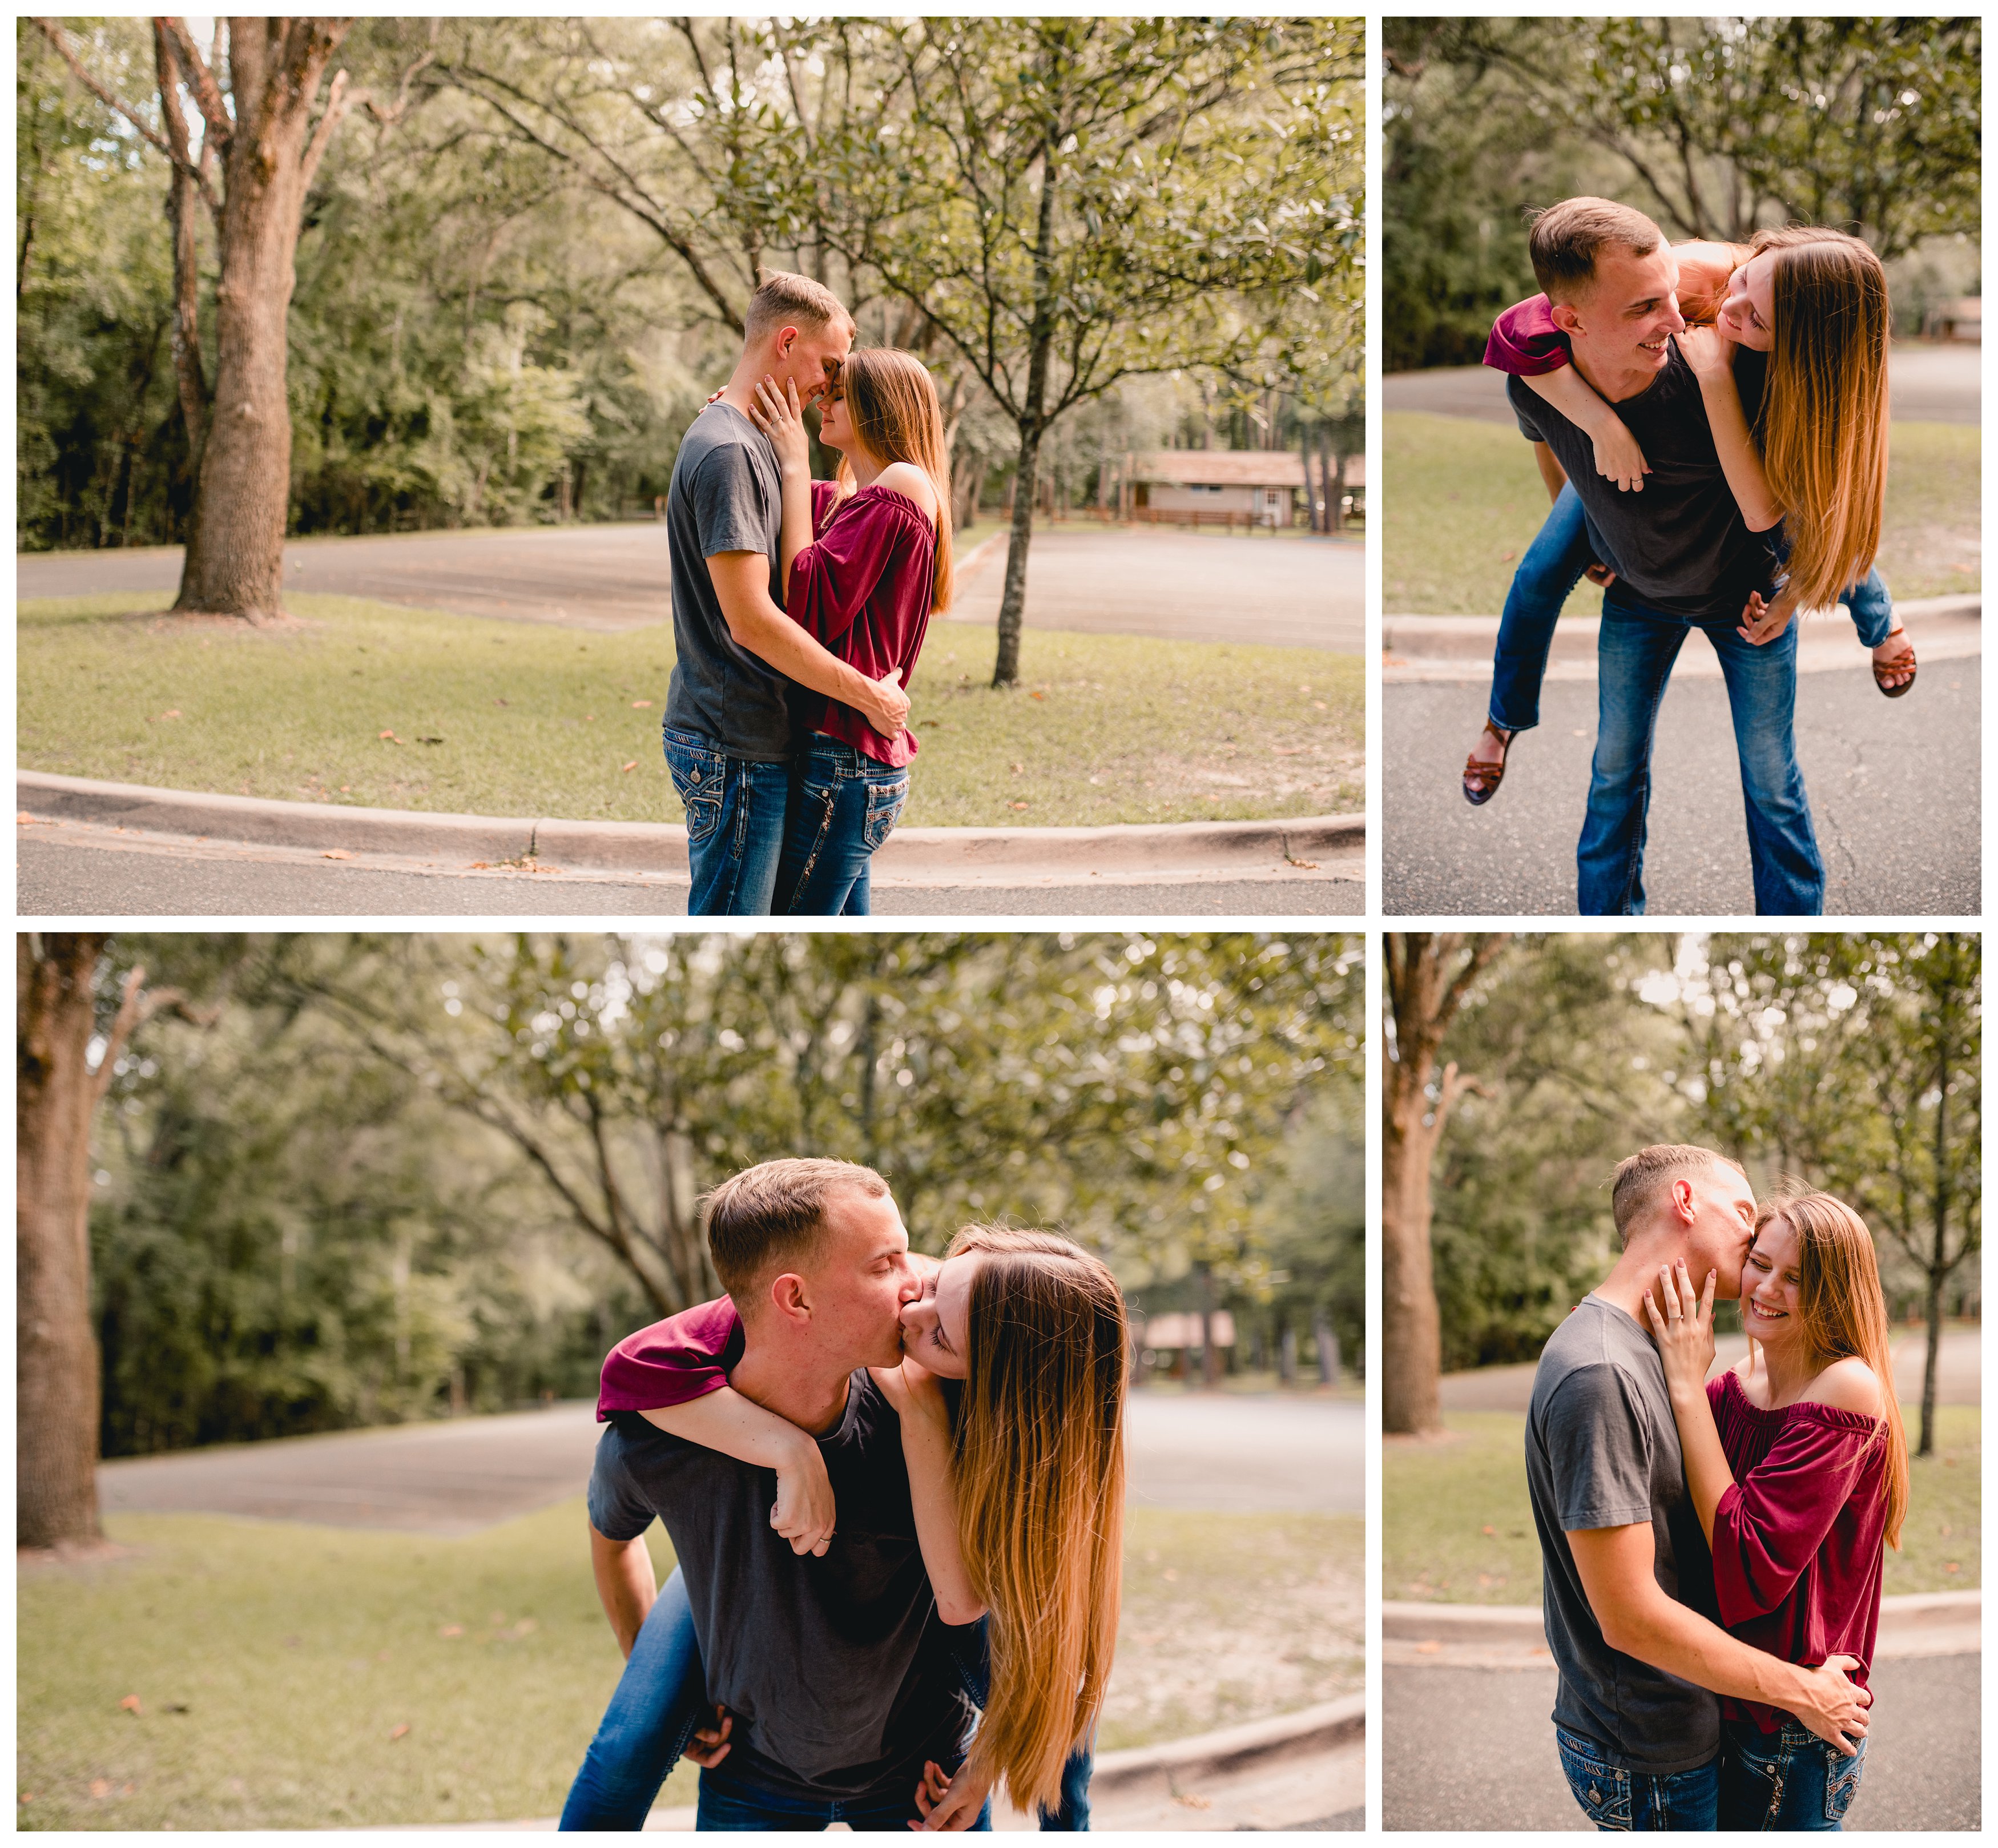 Live Oak engagement session with fun poses for couples.